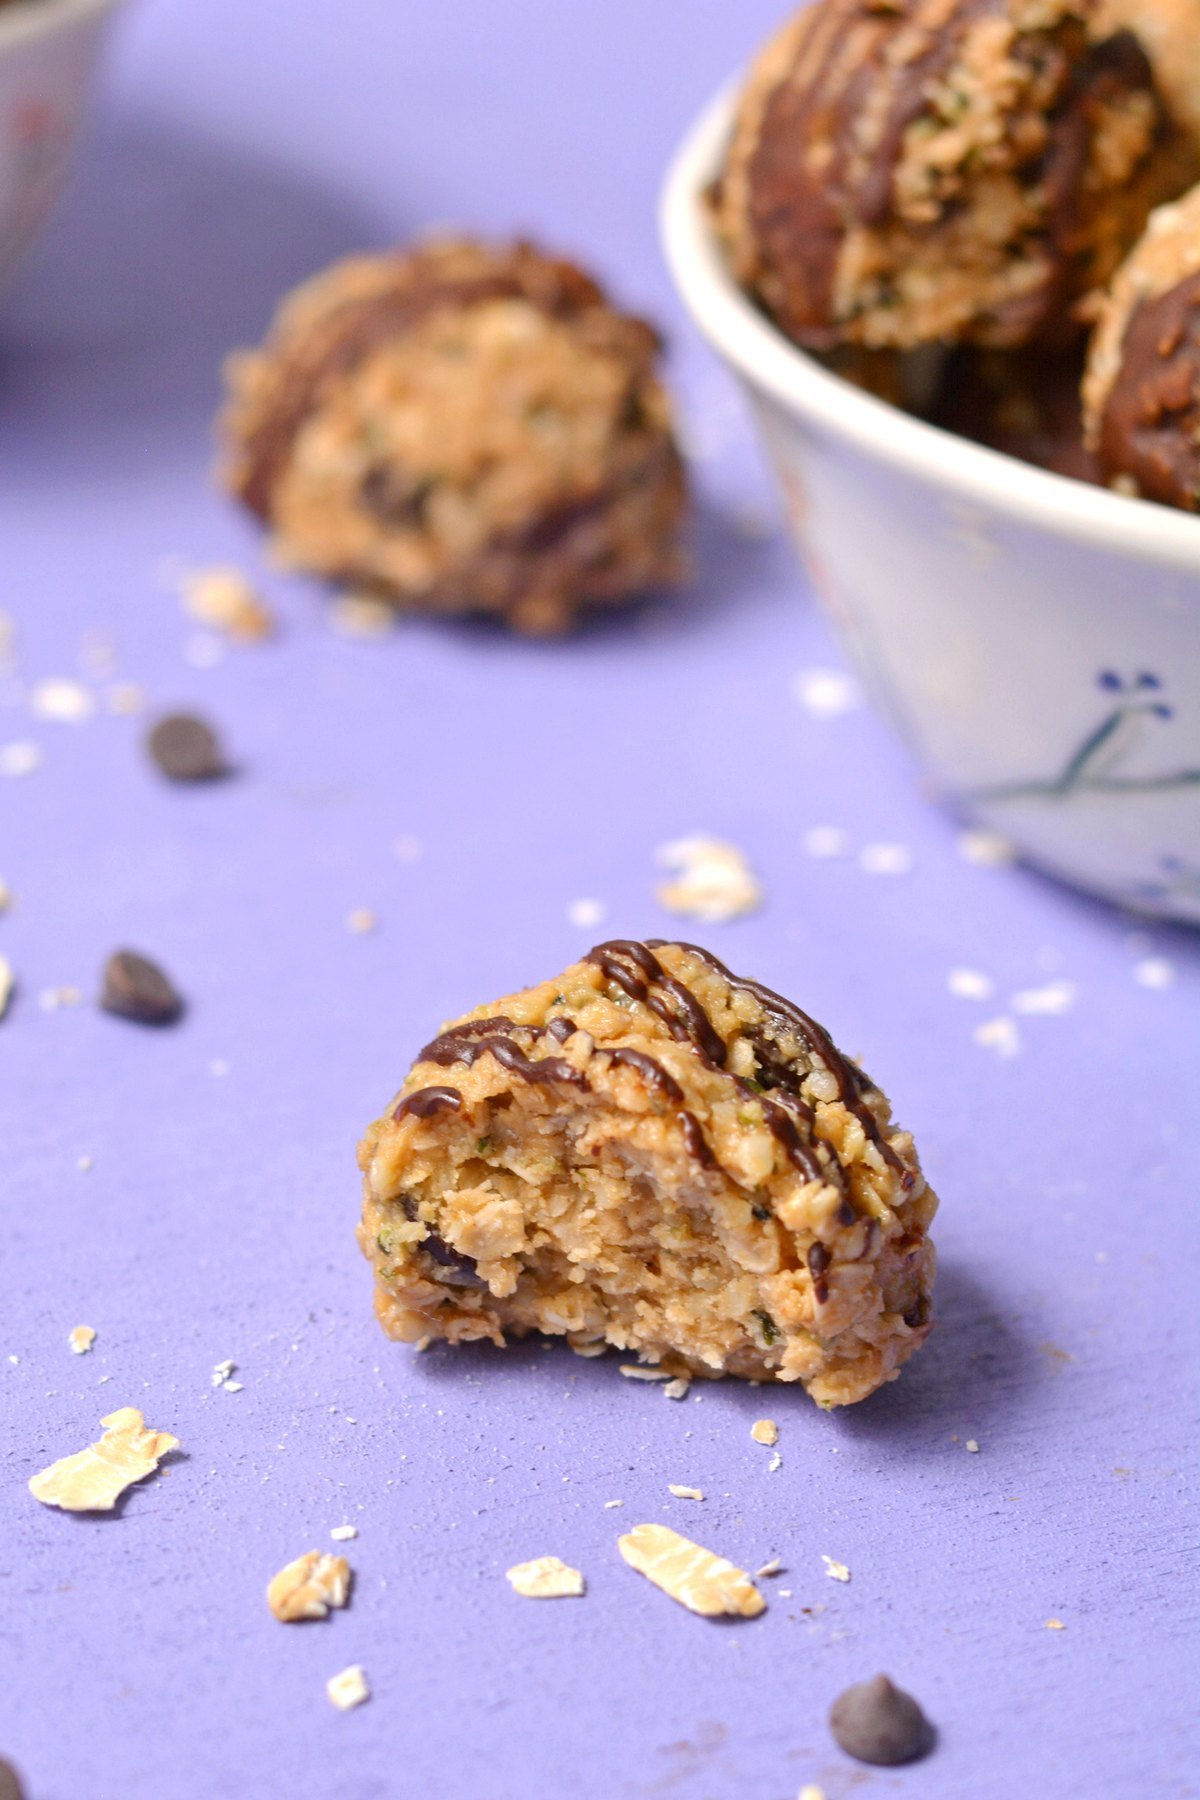 A protein ball with chocolate drizzle and a bite take from in in front of a purple background.